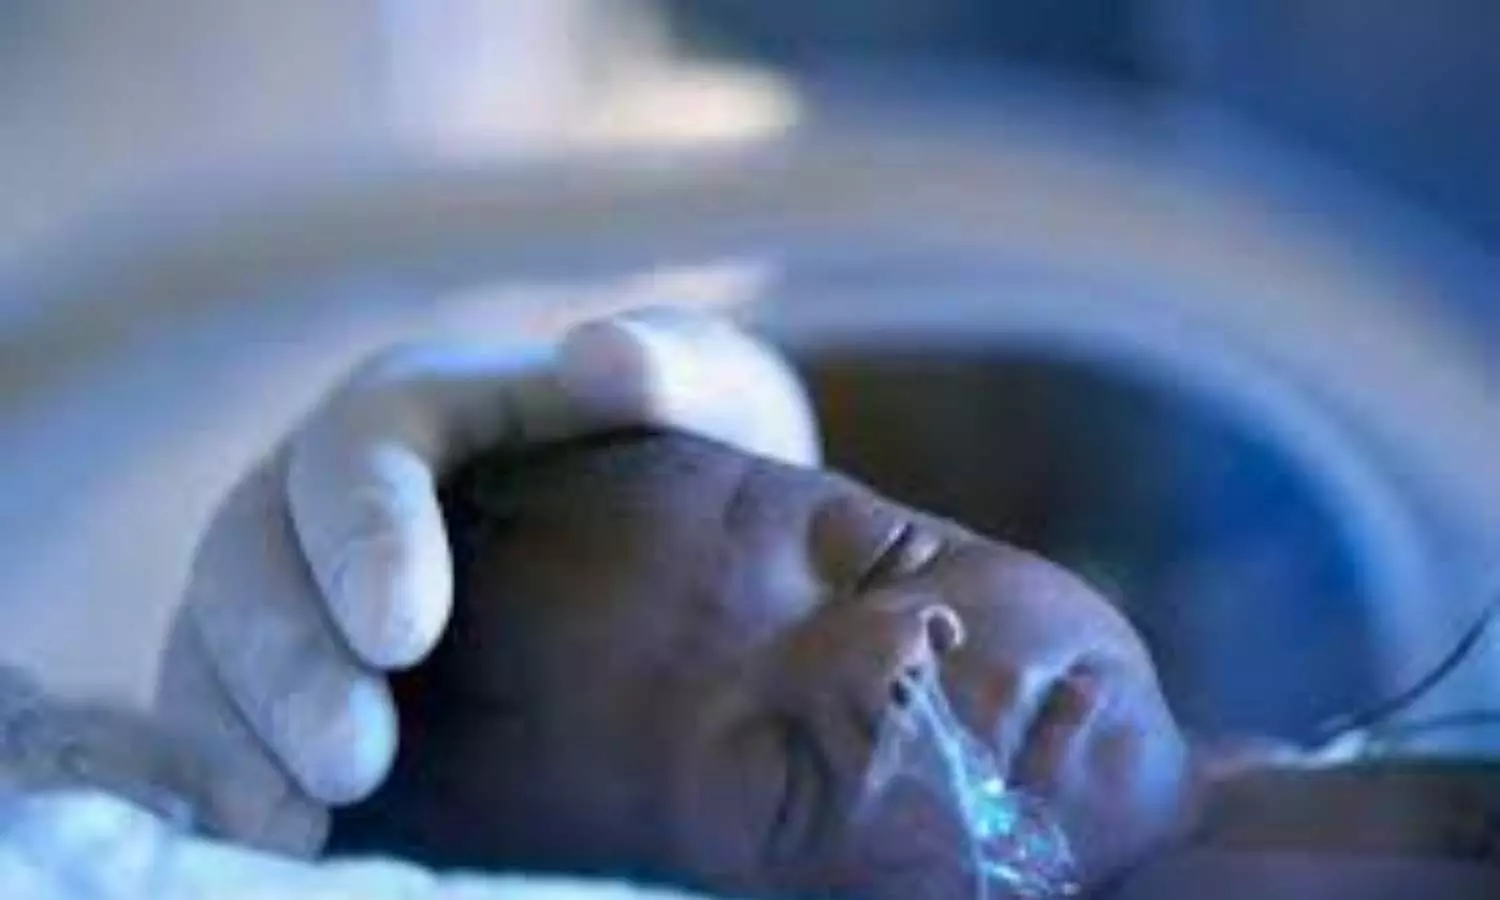 Low-dose steroids reduce time on ventilators and preserve heart in premature infants, study